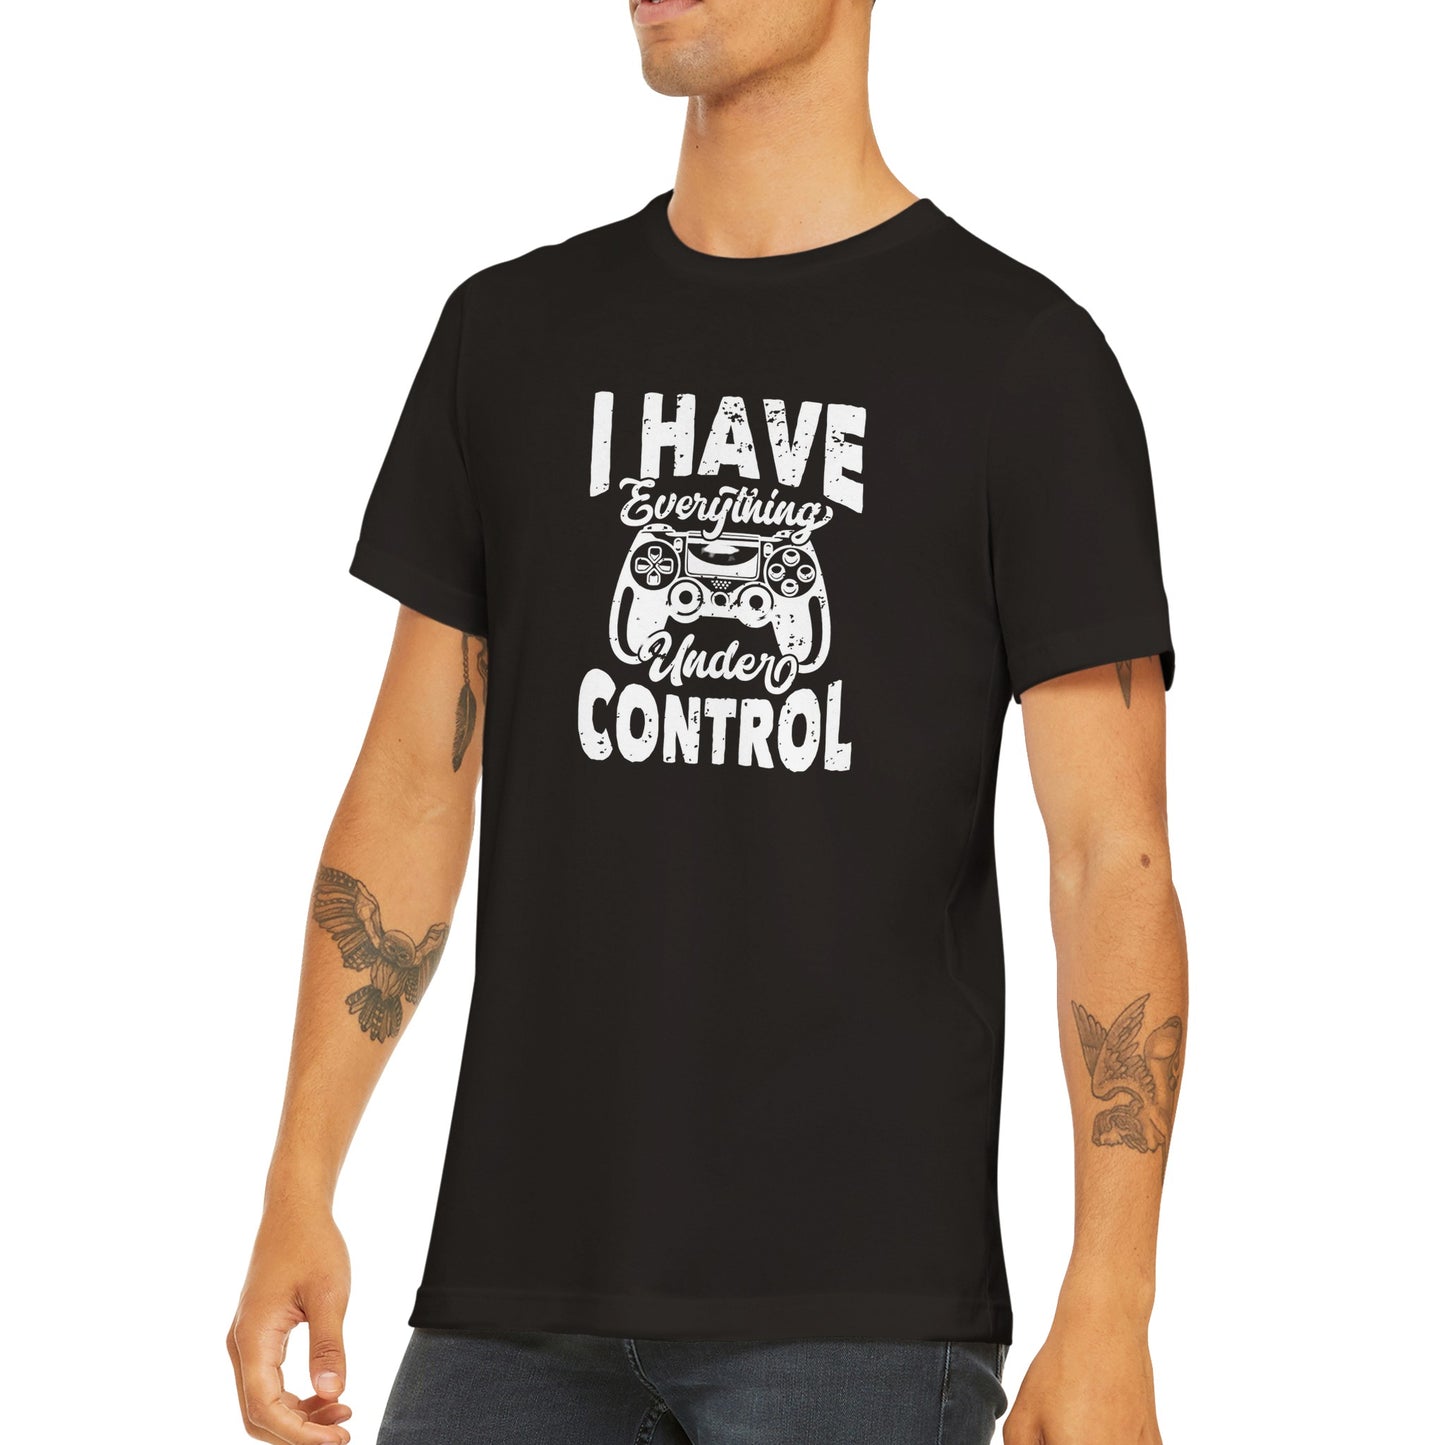 I have everything under control T-shirt